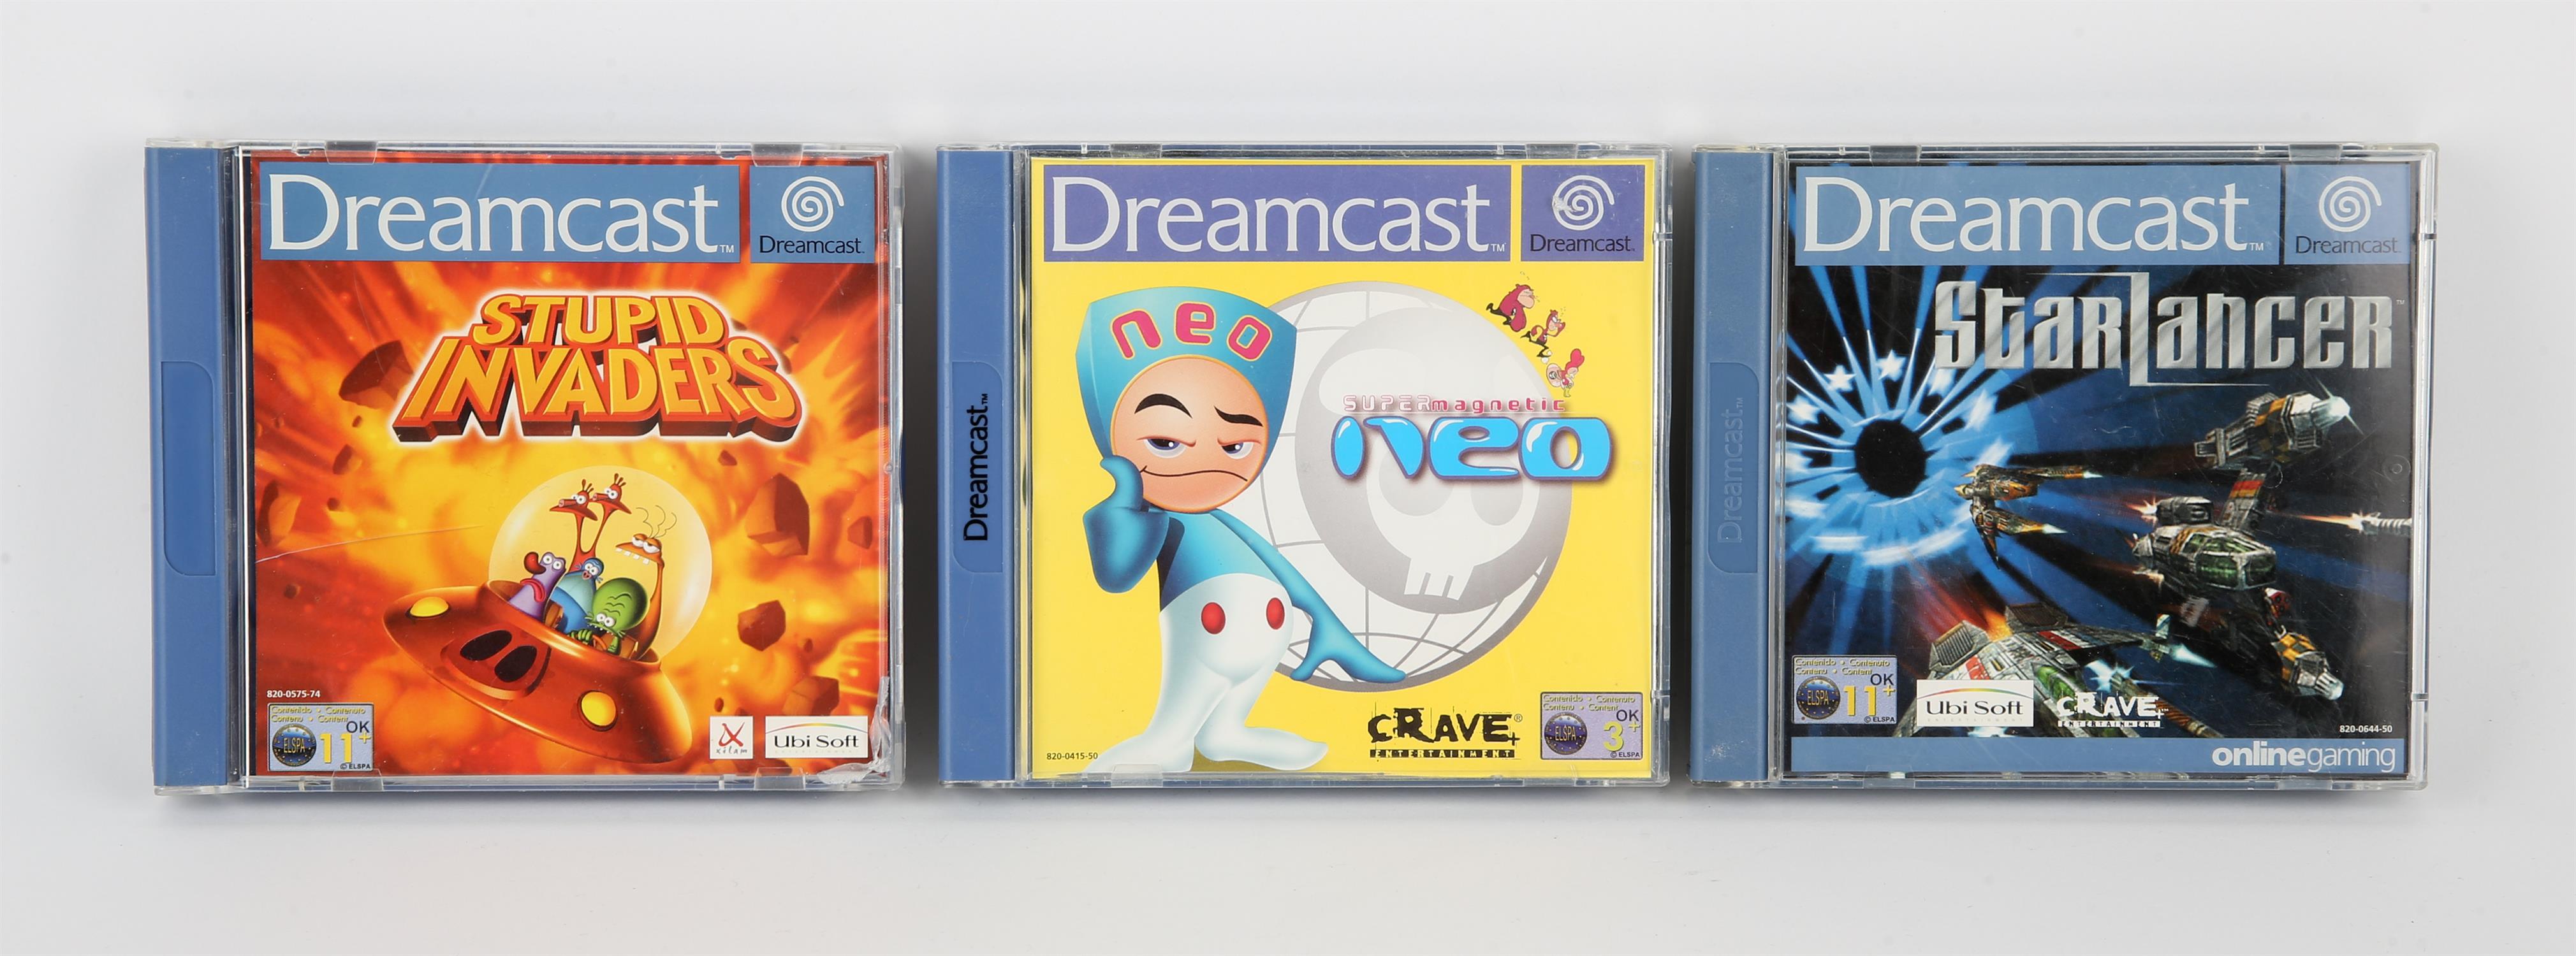 Sega Dreamcast Sci-Fi bundle (PAL) Games include: Super Magnetic Neo, StarLancer and Stupid